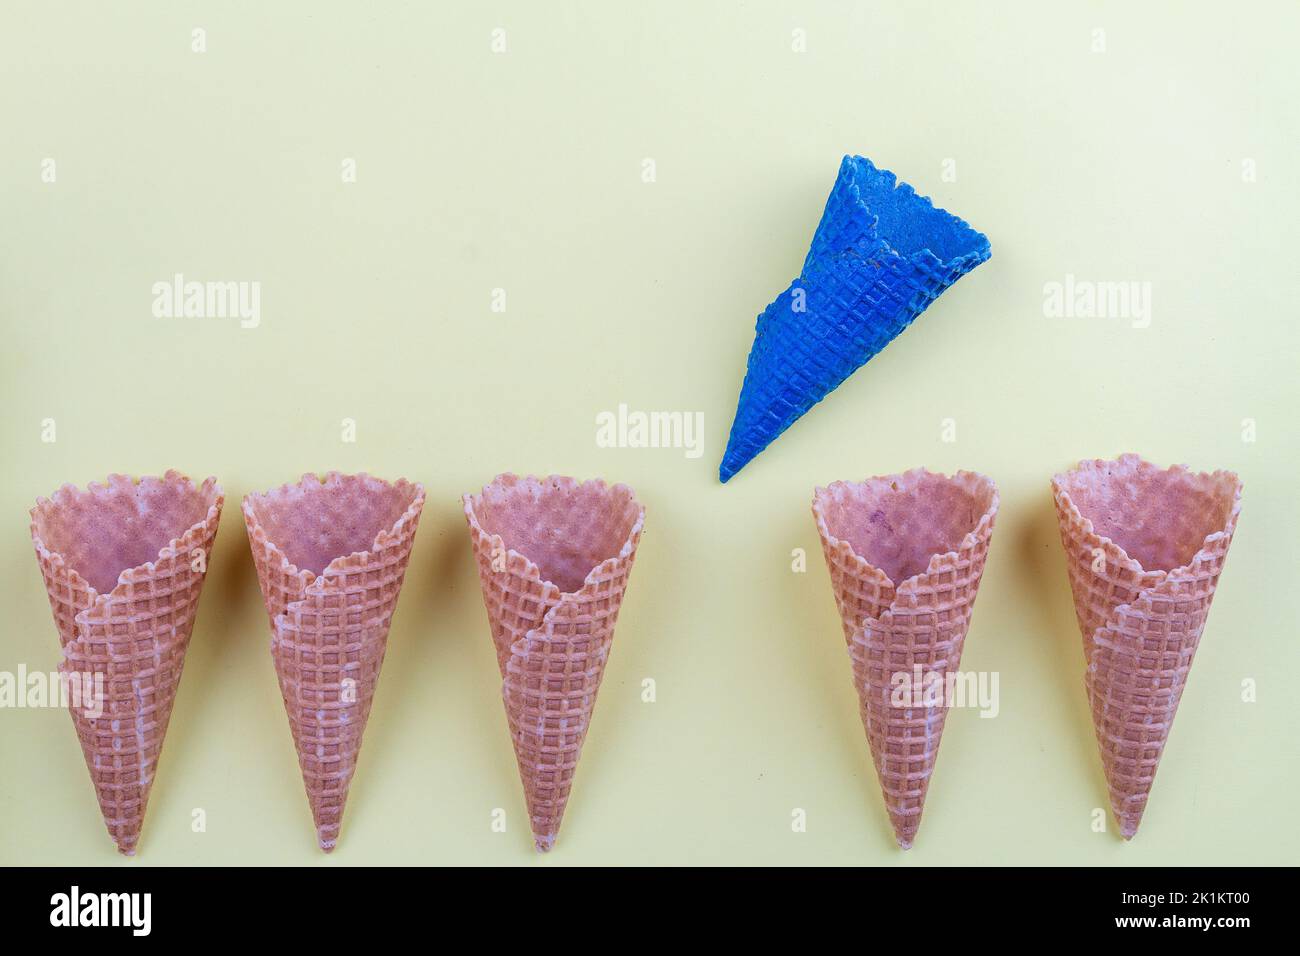 Blue ice cream cone waffle between ordinary ones. Stand out from others concept. Stock Photo